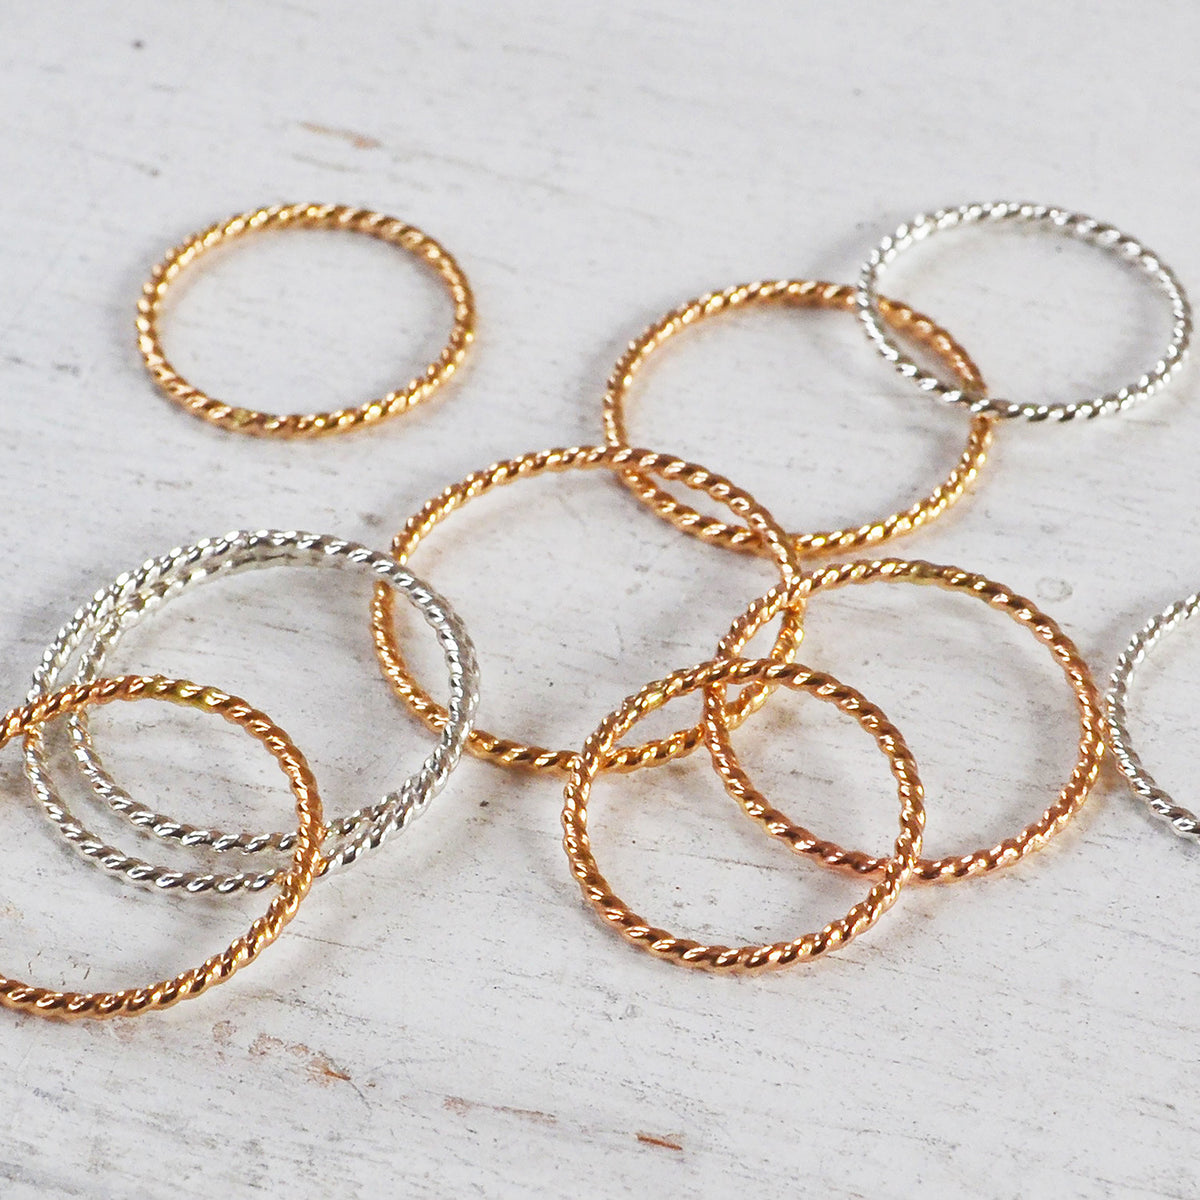 Glitter Stacking Ring, Gold, Rose Gold, or Silver